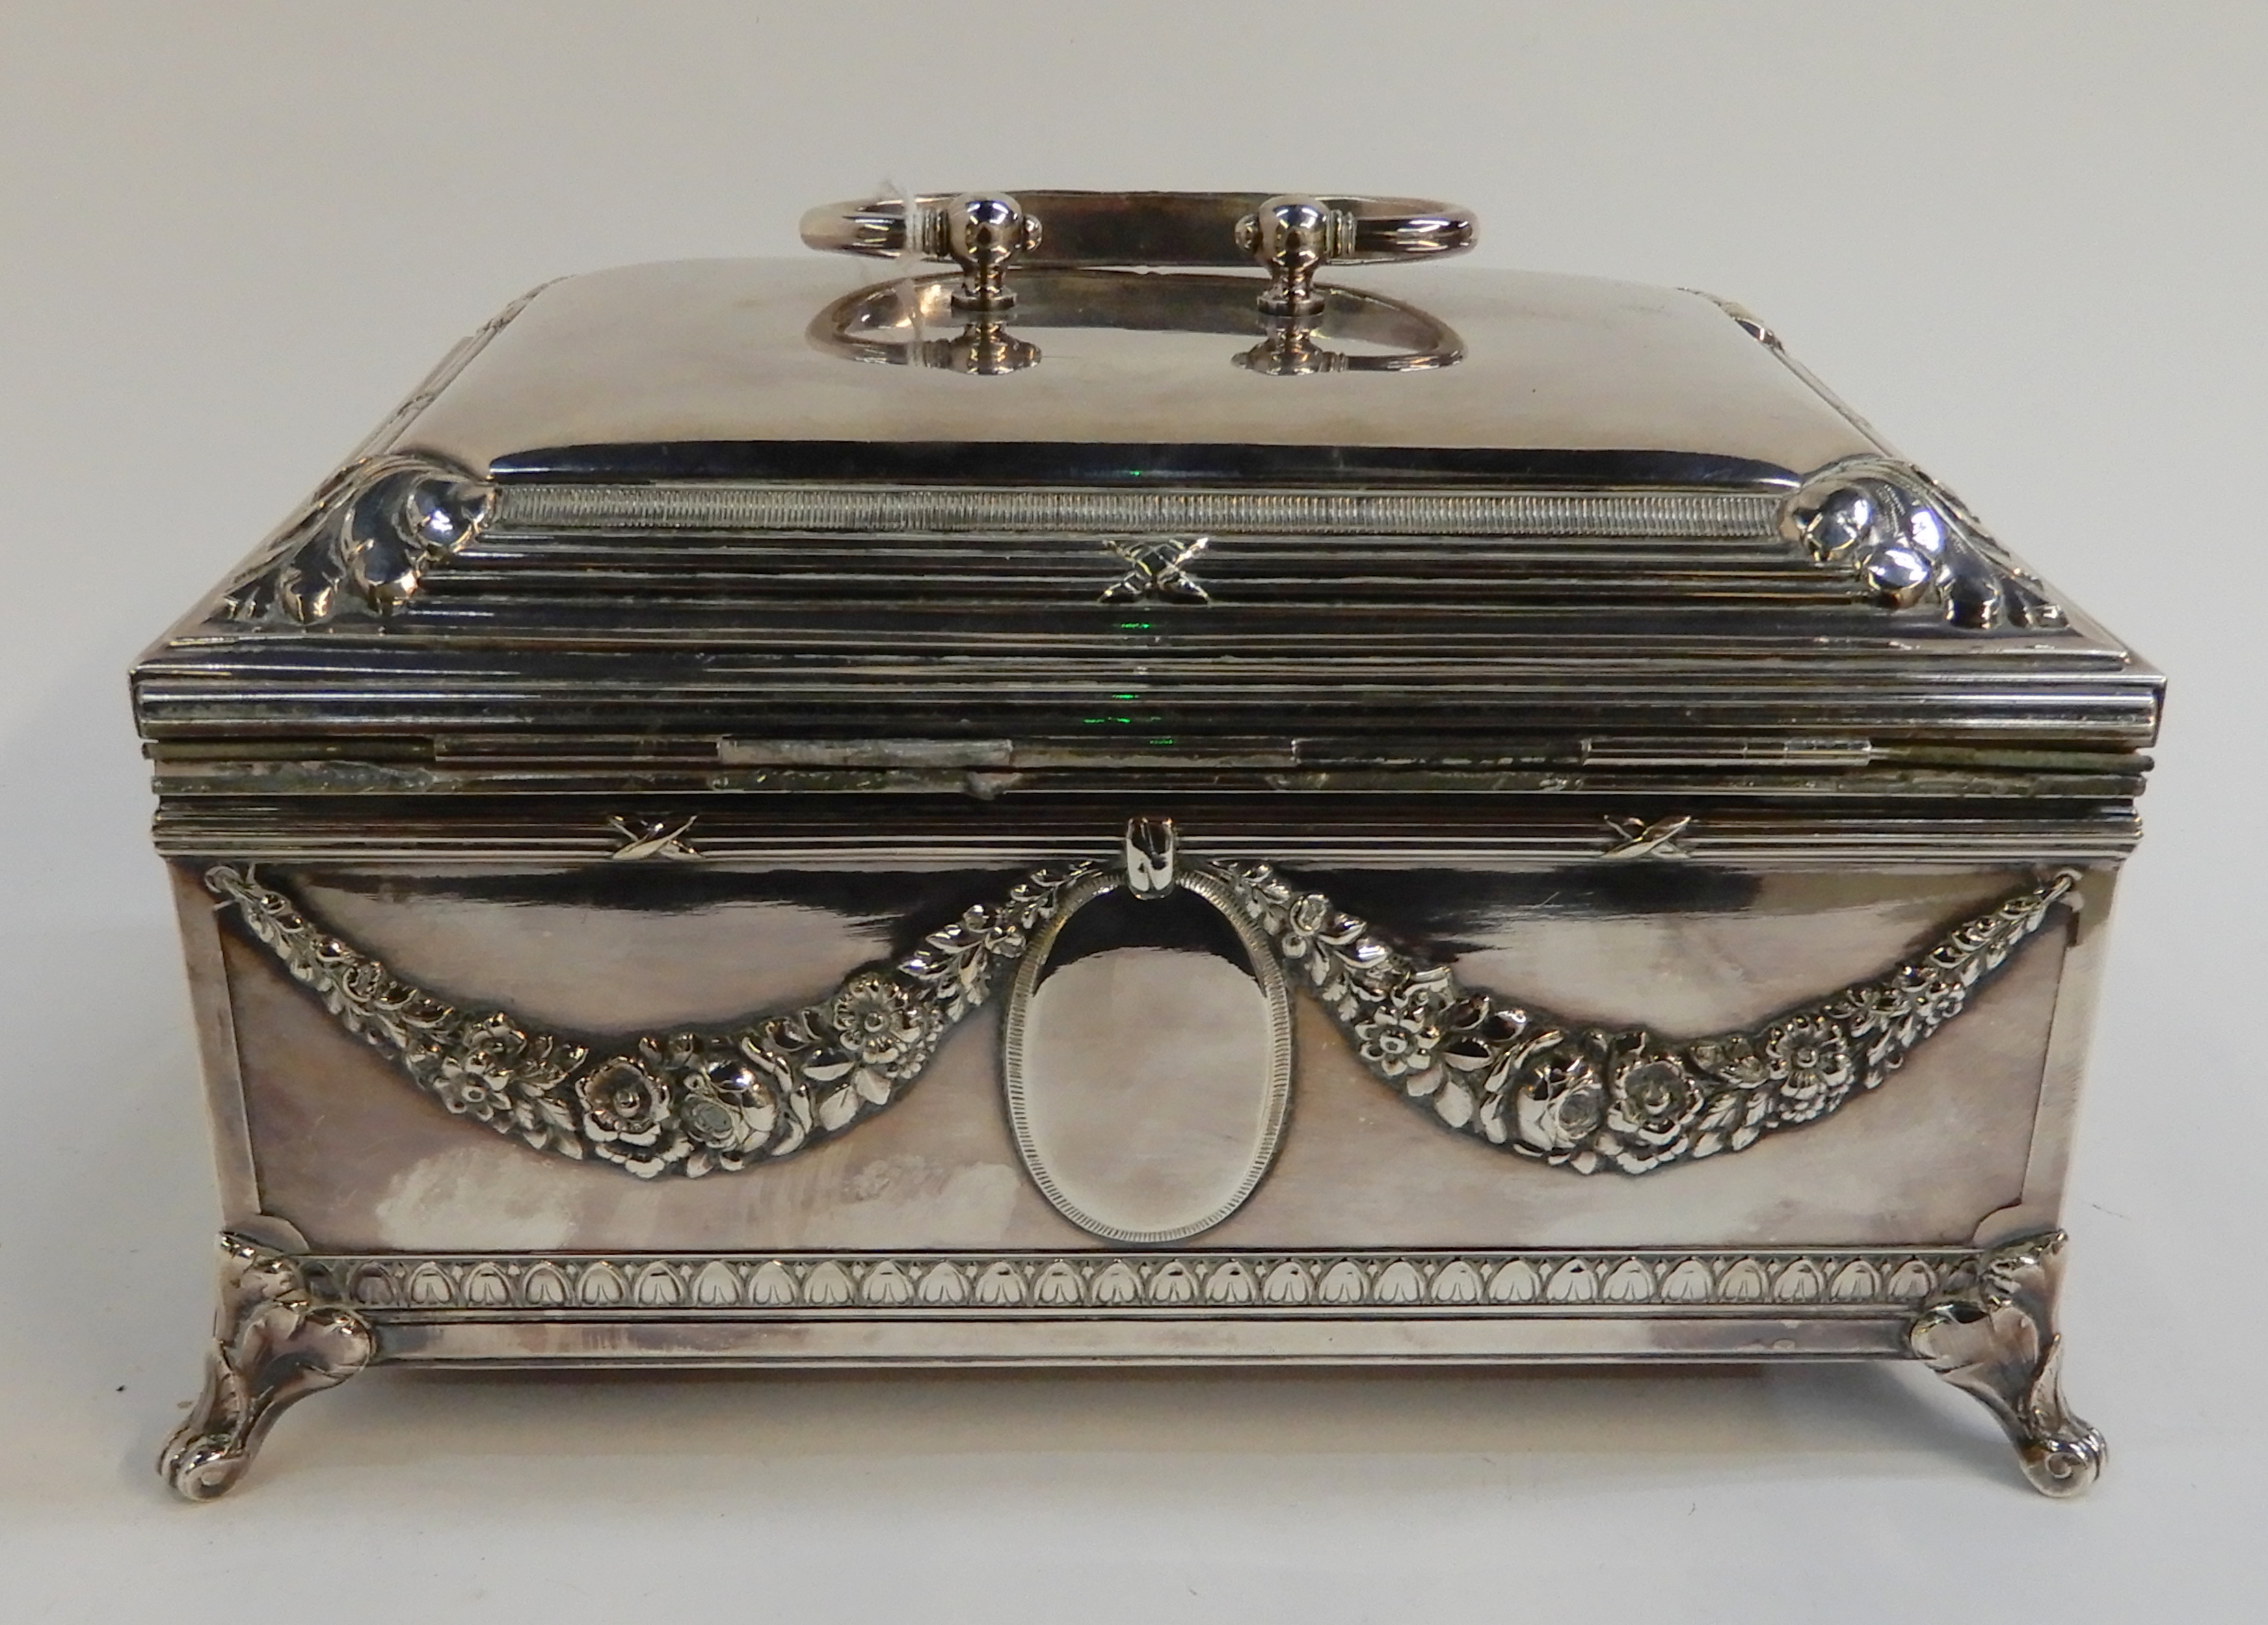 A silver plated casket decorated with floral swag decoration and fitted interior, 22cm x 16cm x 12cm - Image 3 of 3